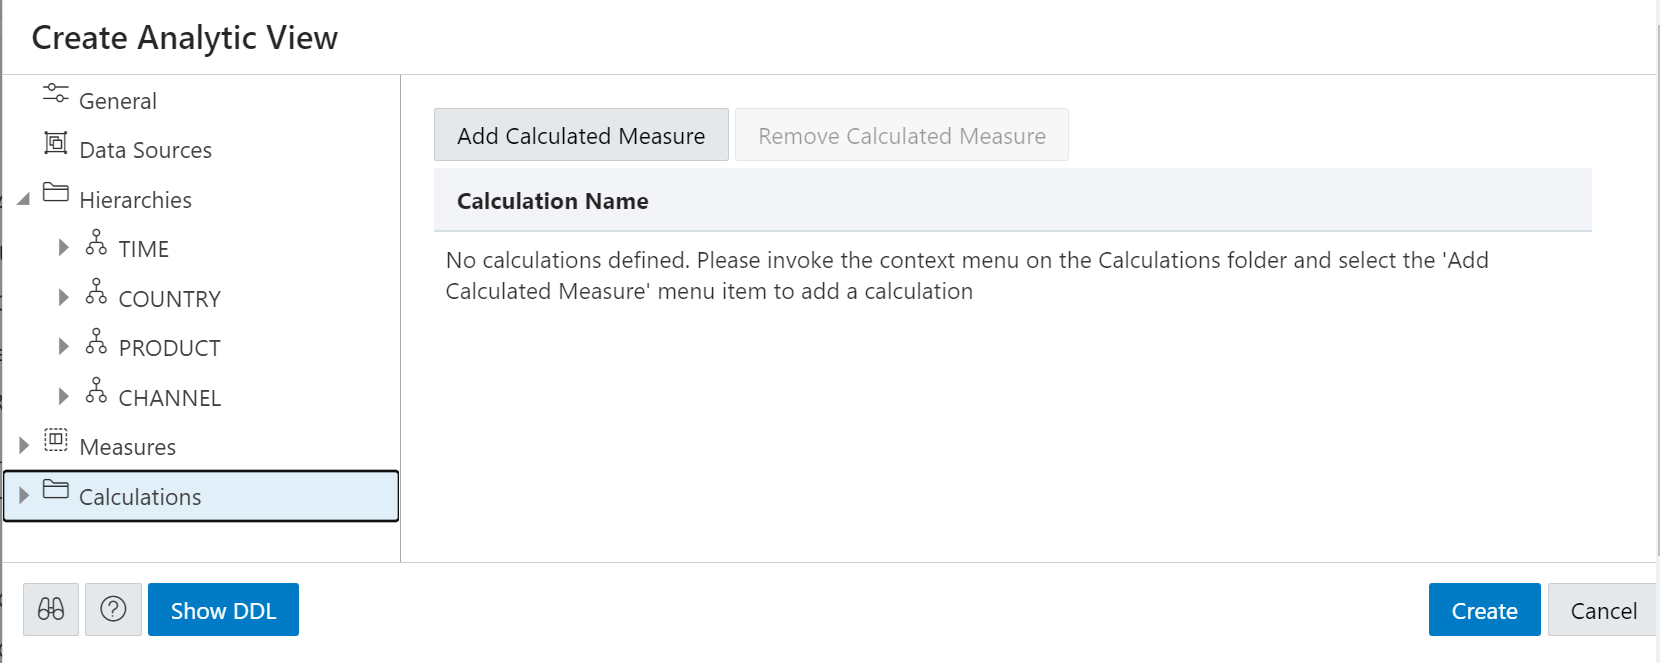 Description of add-calculated-measure.png follows